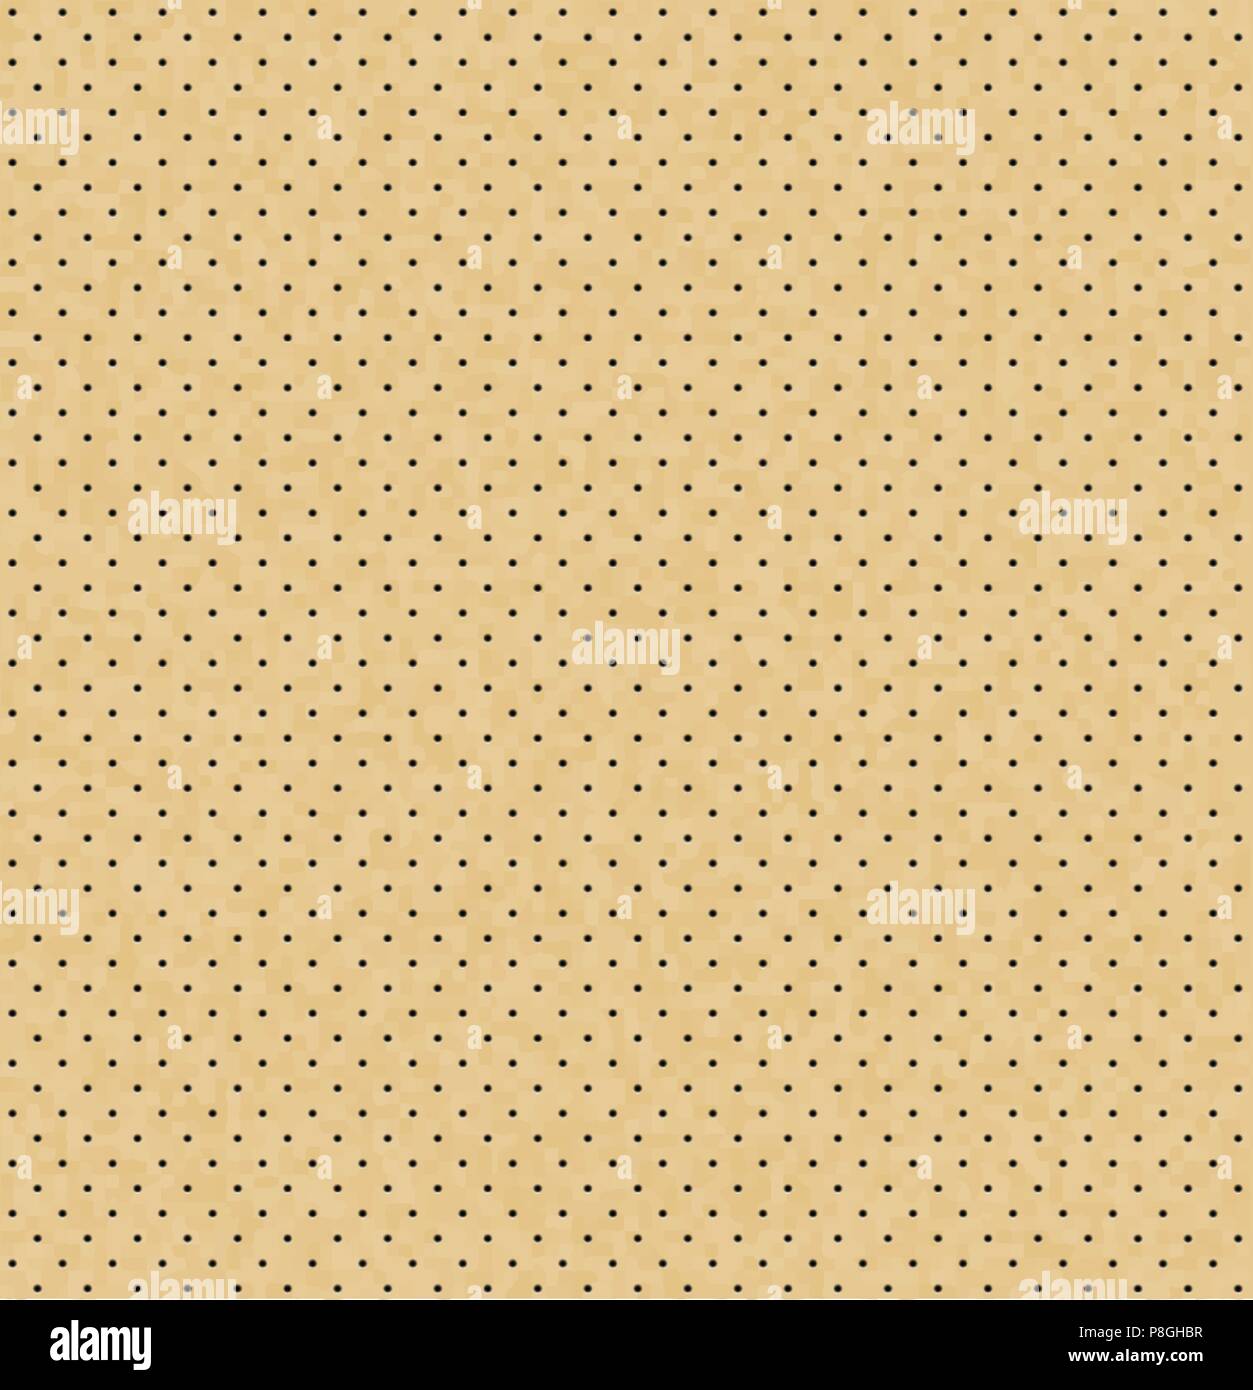 Vector light perforated leather seamless texture. Realistic perforated background. Beige dotted pattern. Car seat material design. Endless page fill Stock Vector